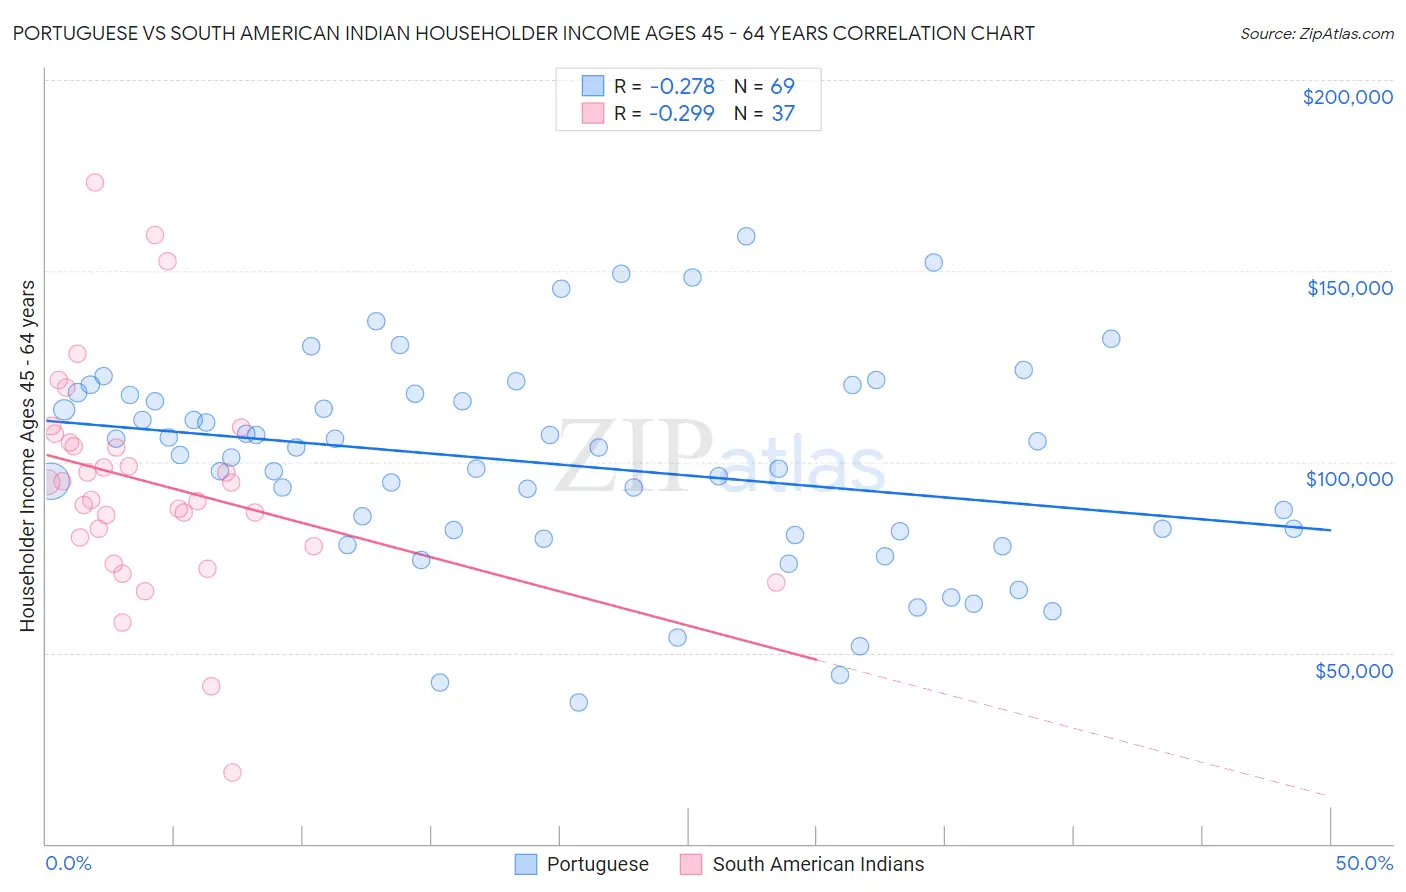 Portuguese vs South American Indian Householder Income Ages 45 - 64 years